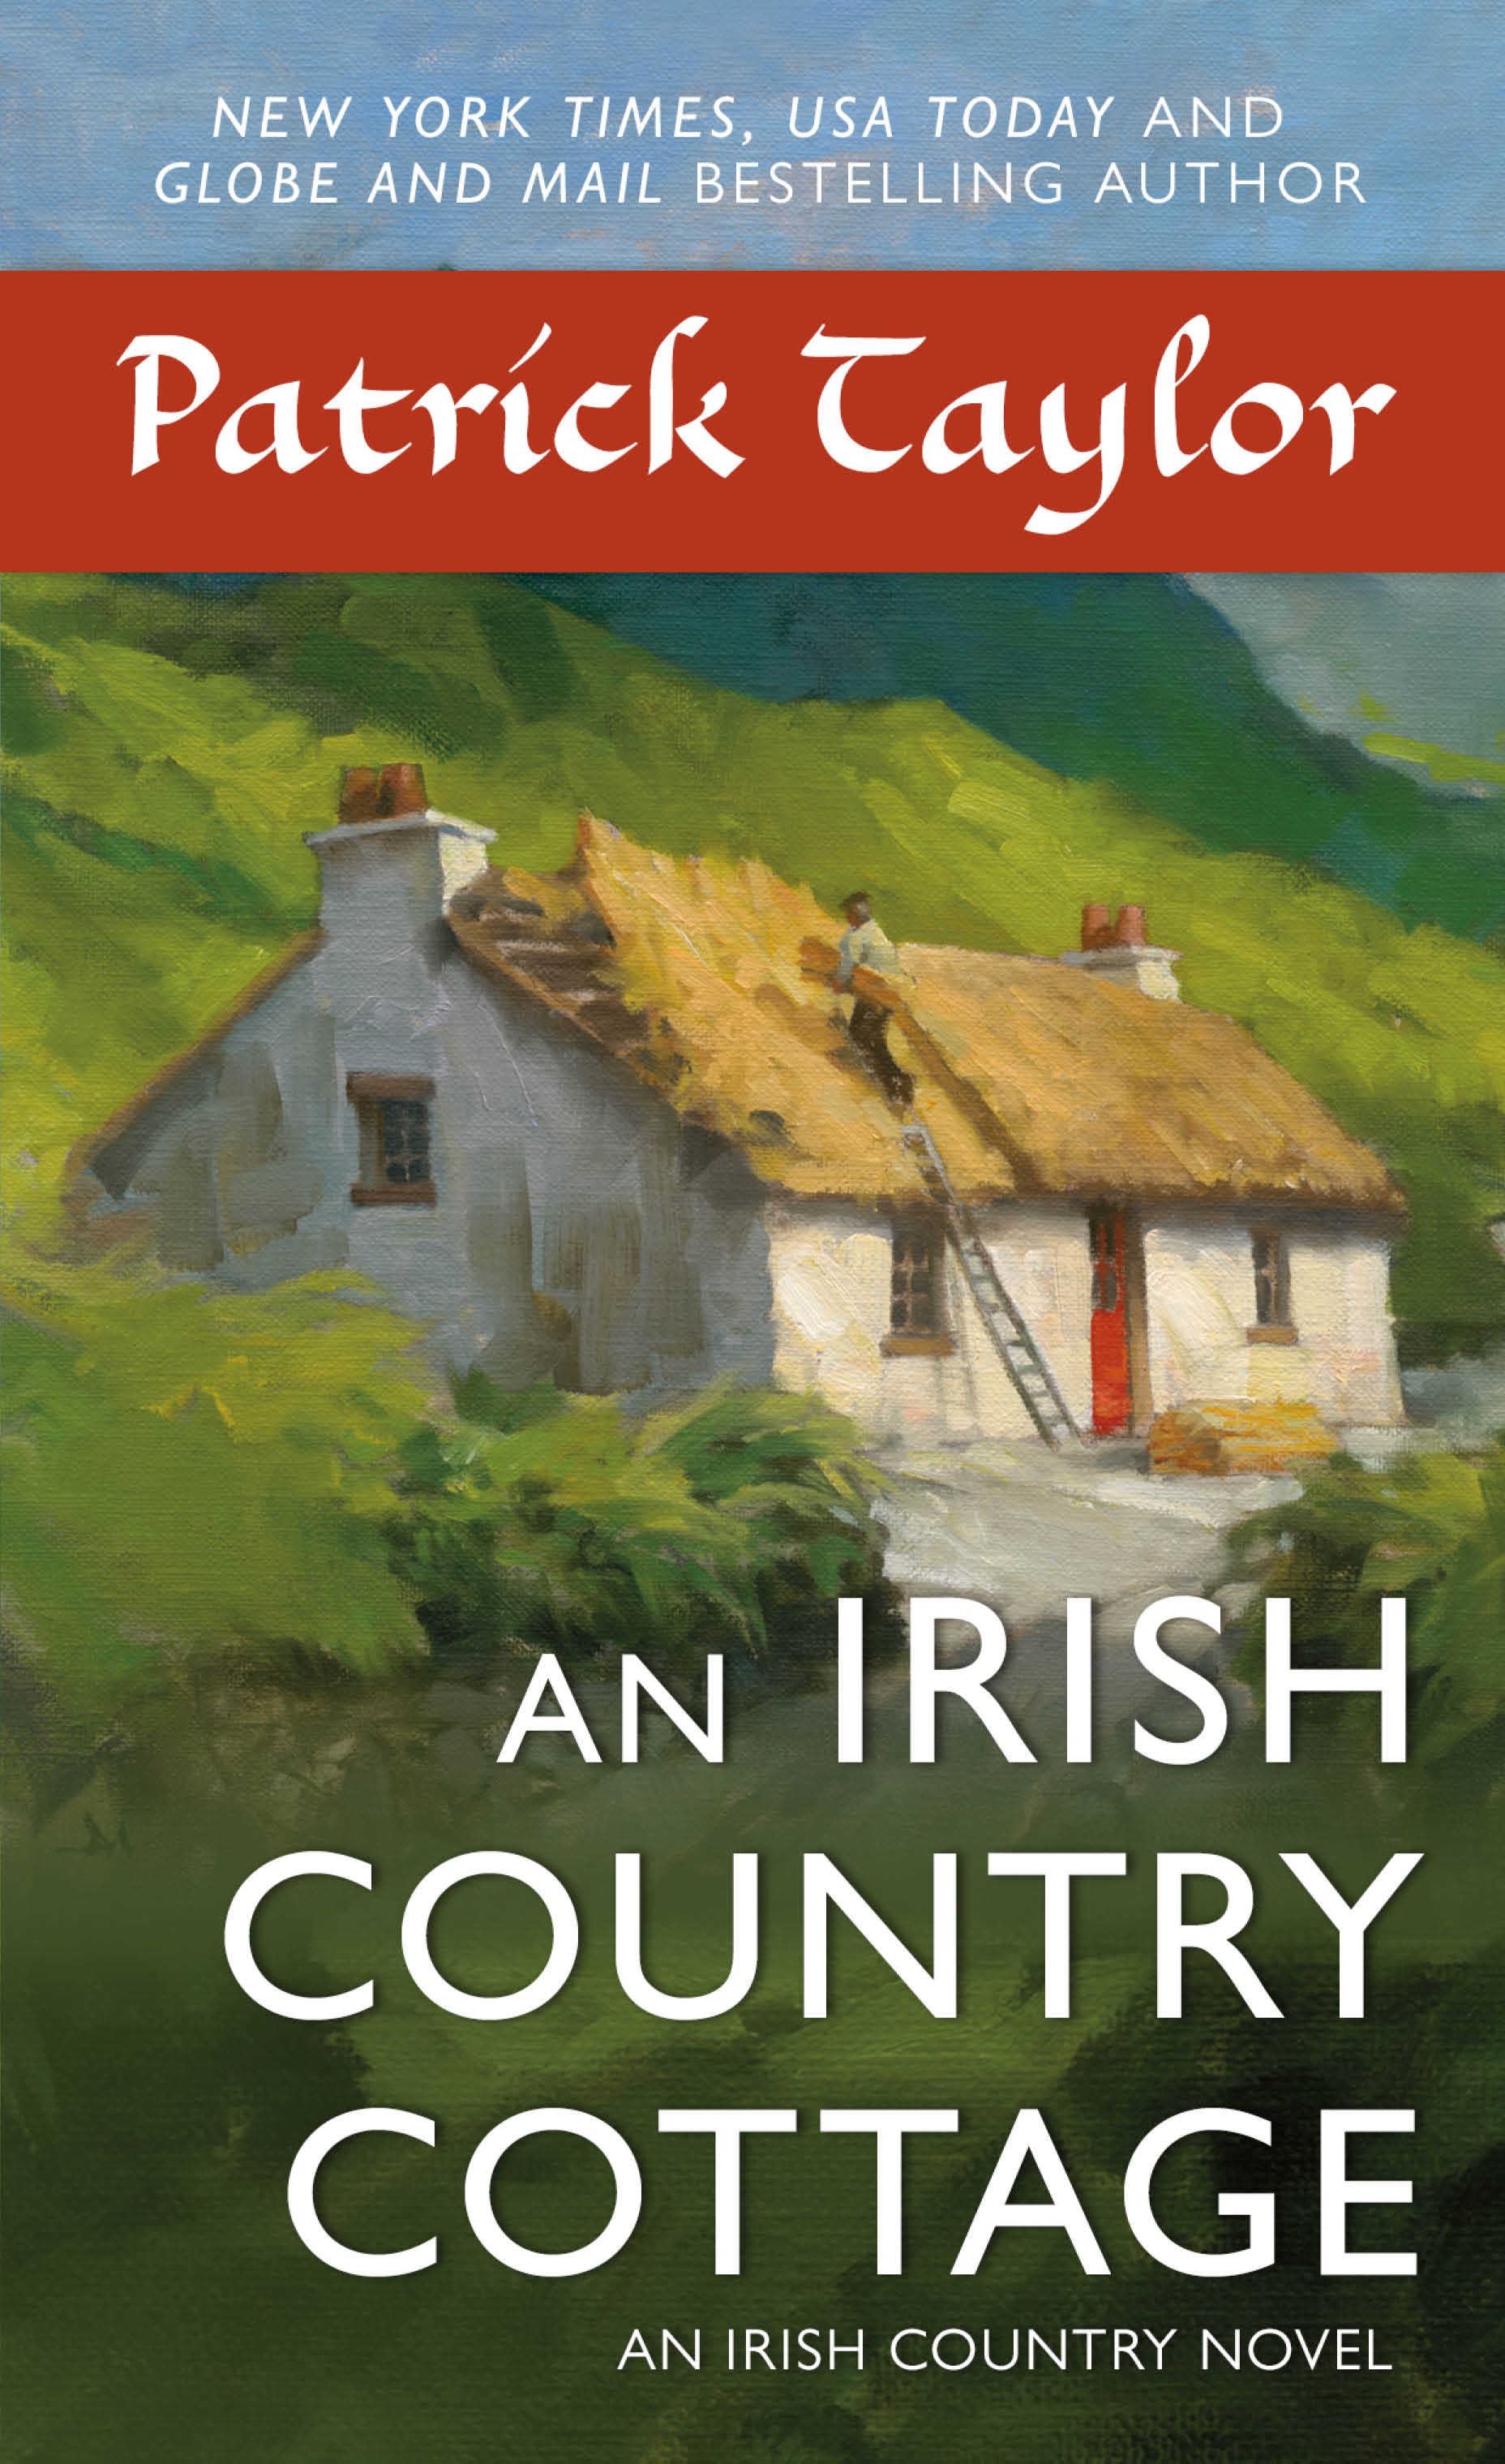 An Irish Country Cottage : An Irish Country Novel by Patrick Taylor